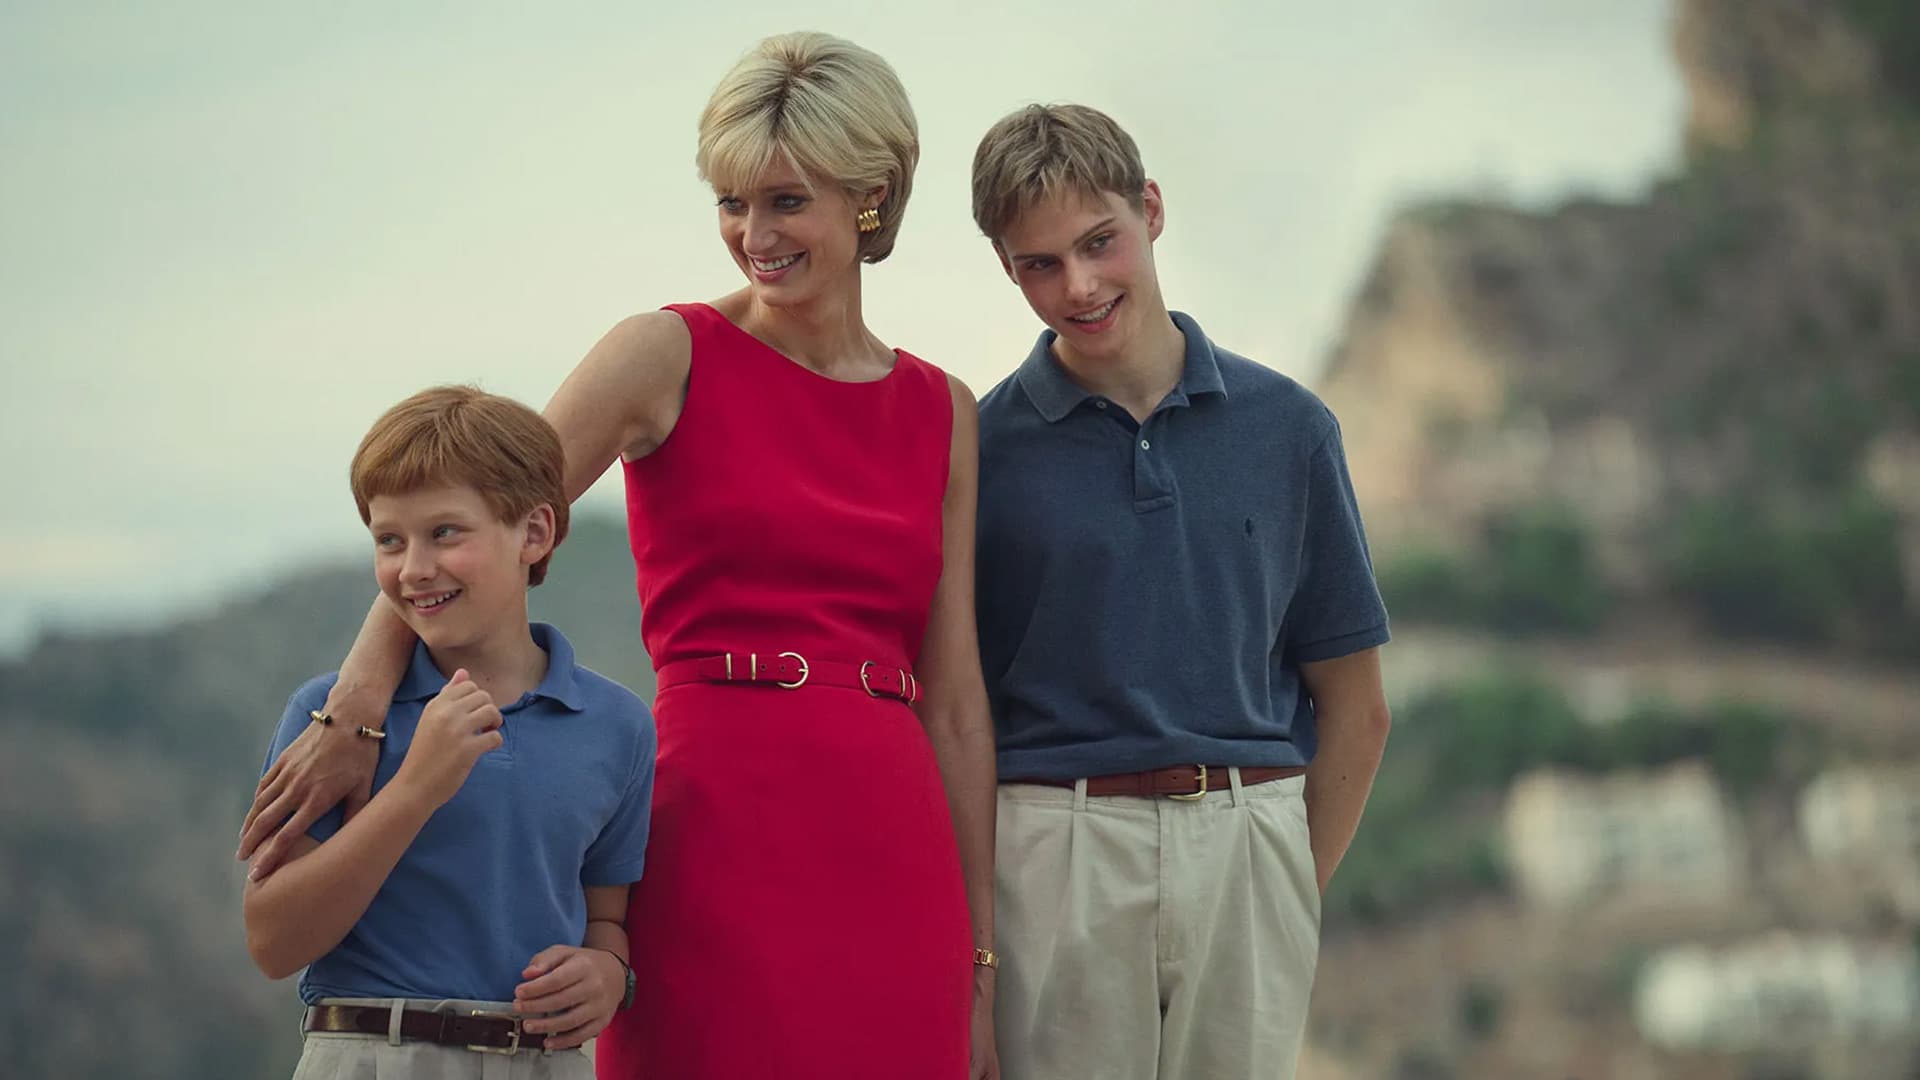 Still image from "The Crown" featuring Princess Diana and her two sons